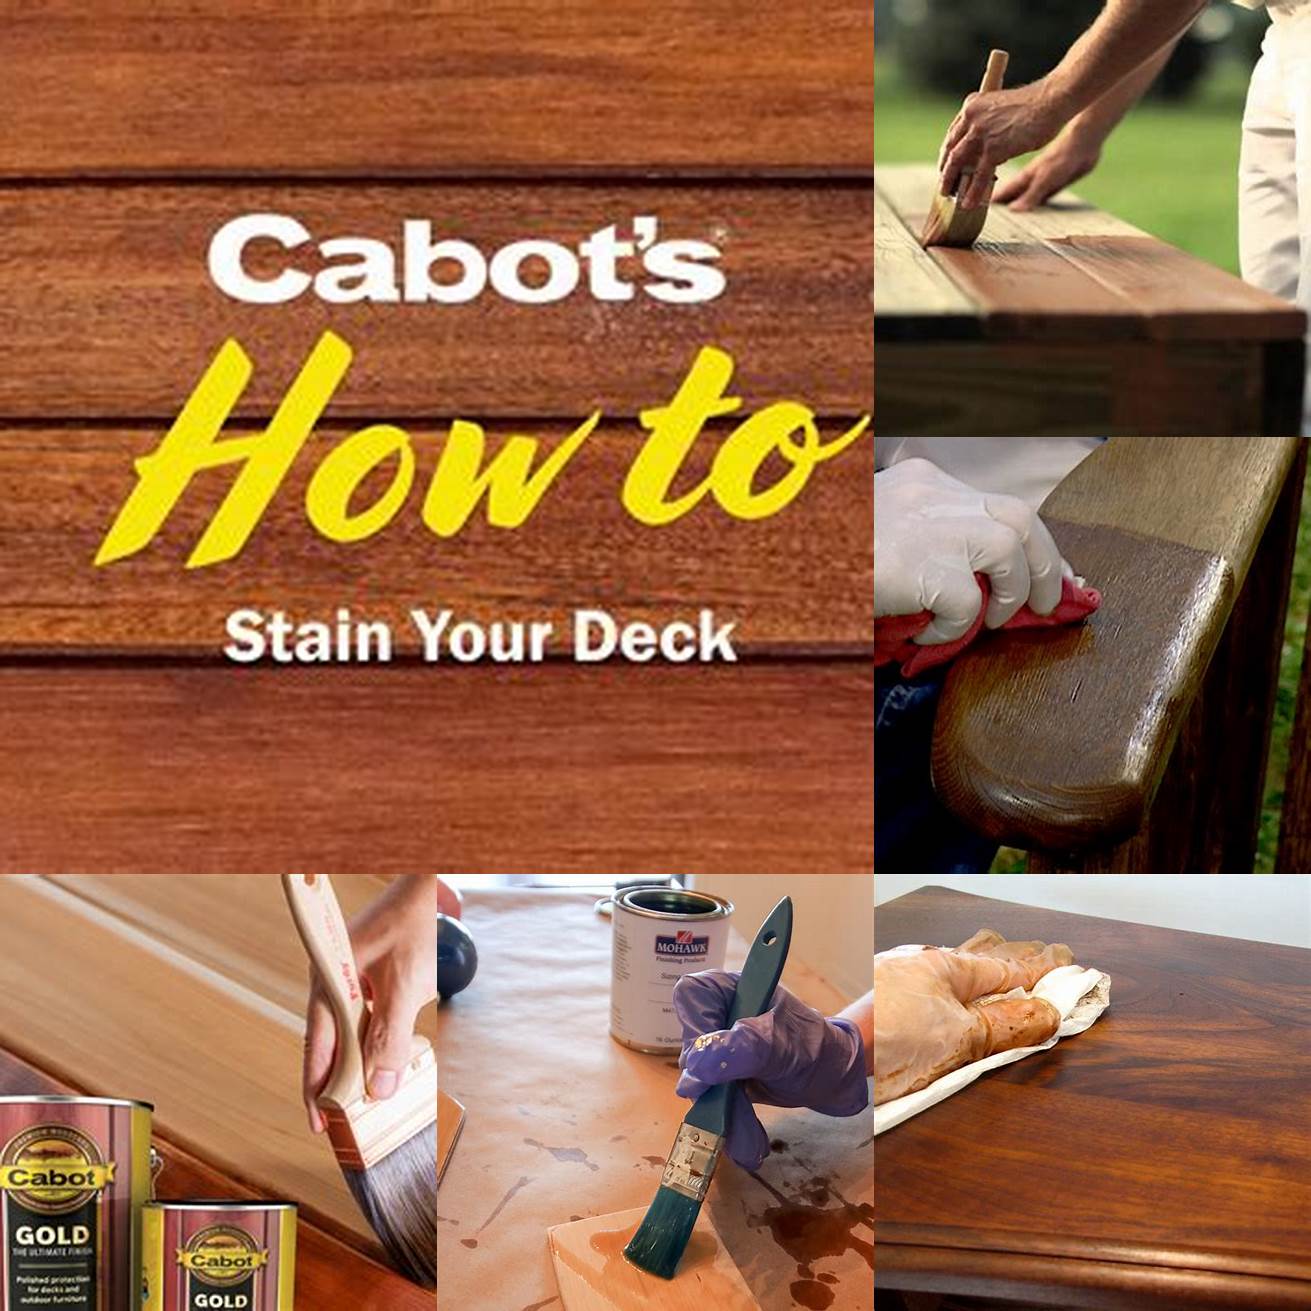 Applying Cabot Stain